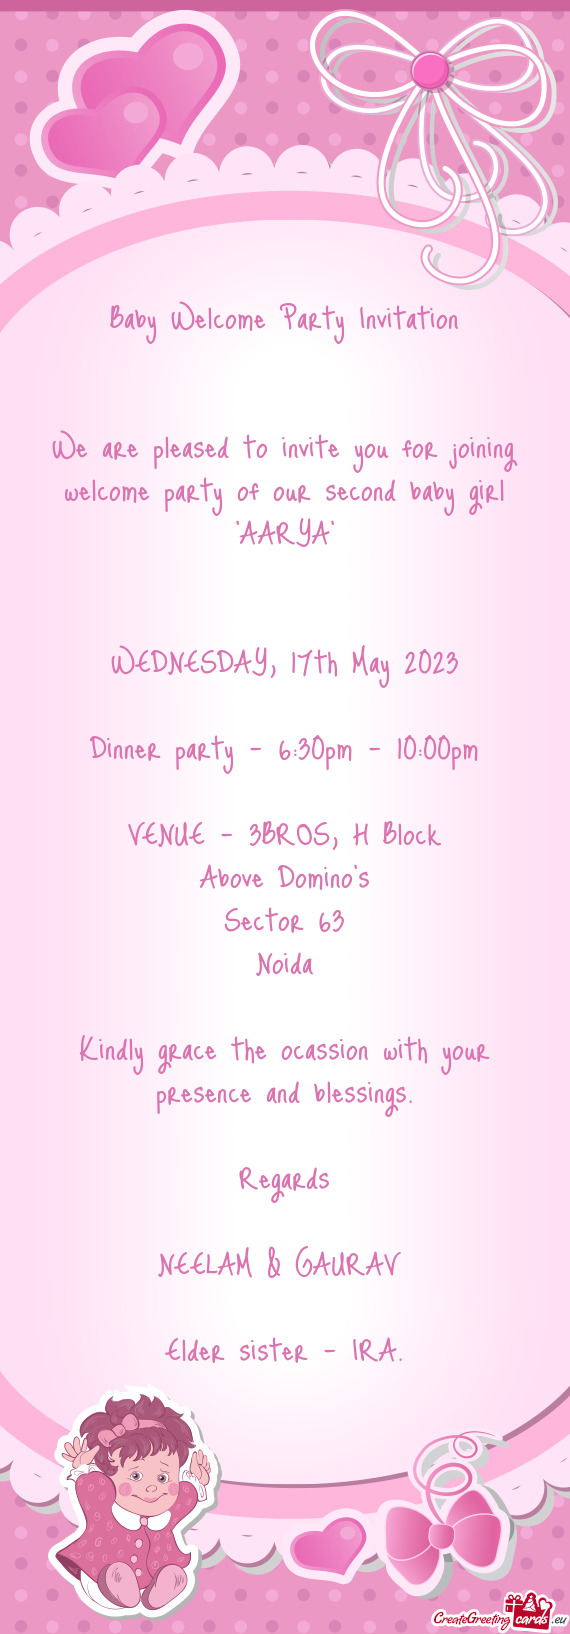 We are pleased to invite you for joining welcome party of our second baby girl "AARYA"